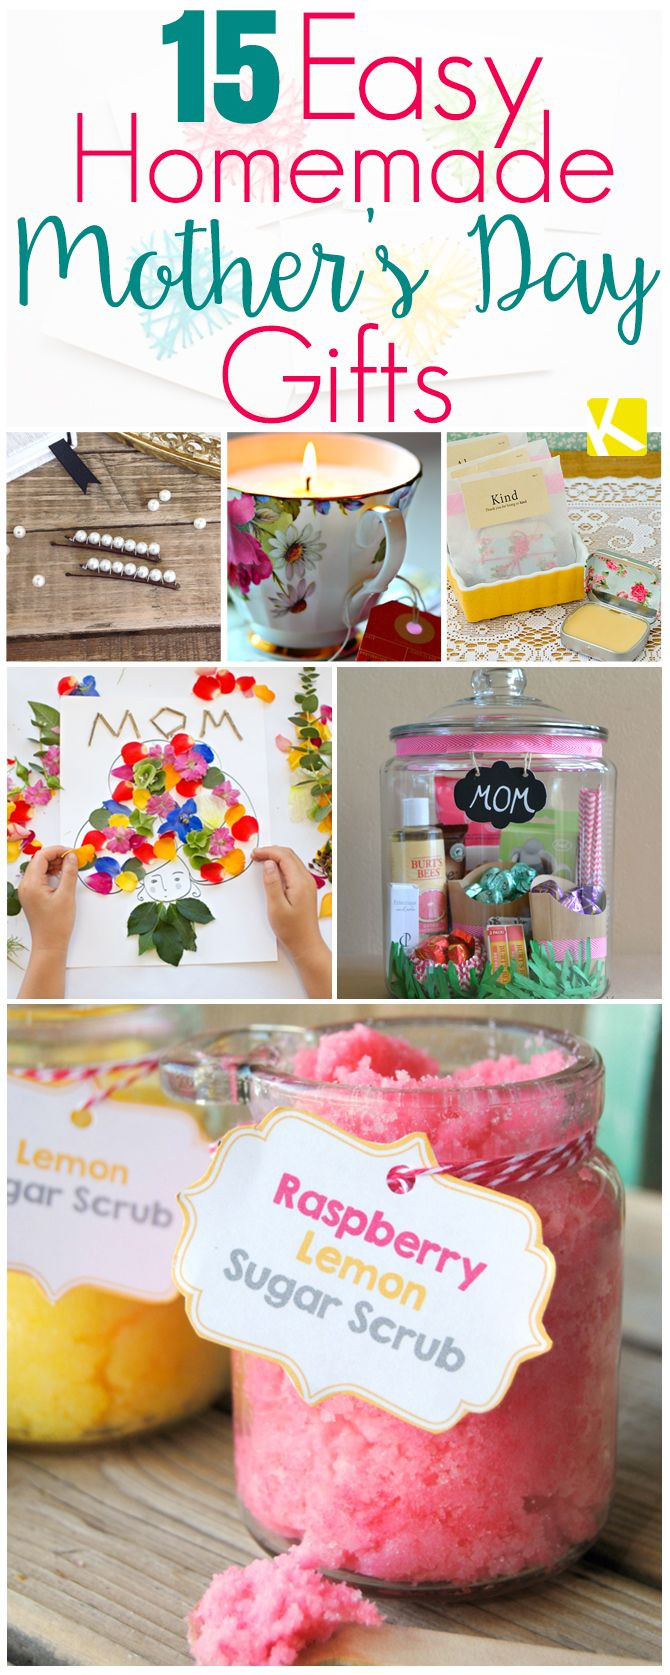 Simple Mother'S Day Gift Ideas
 15 Mother’s Day Gifts That Are Ridiculously Easy to Make